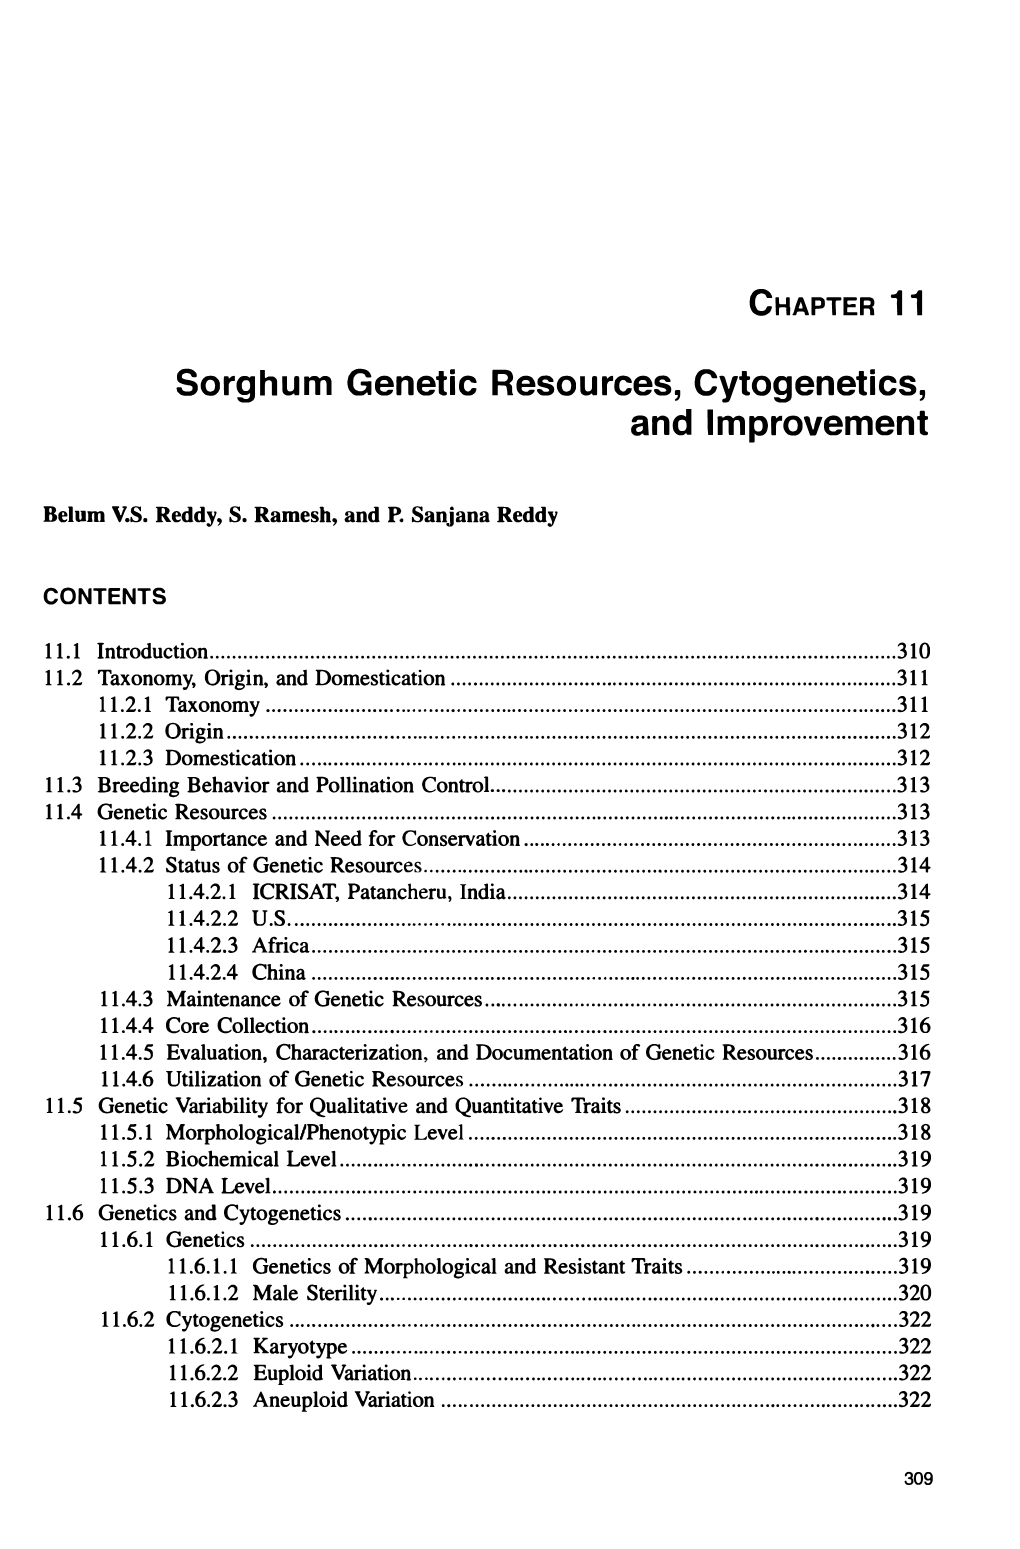 CHAPTER 11 Sorghum Genetic Resources, Cytogenetics, And